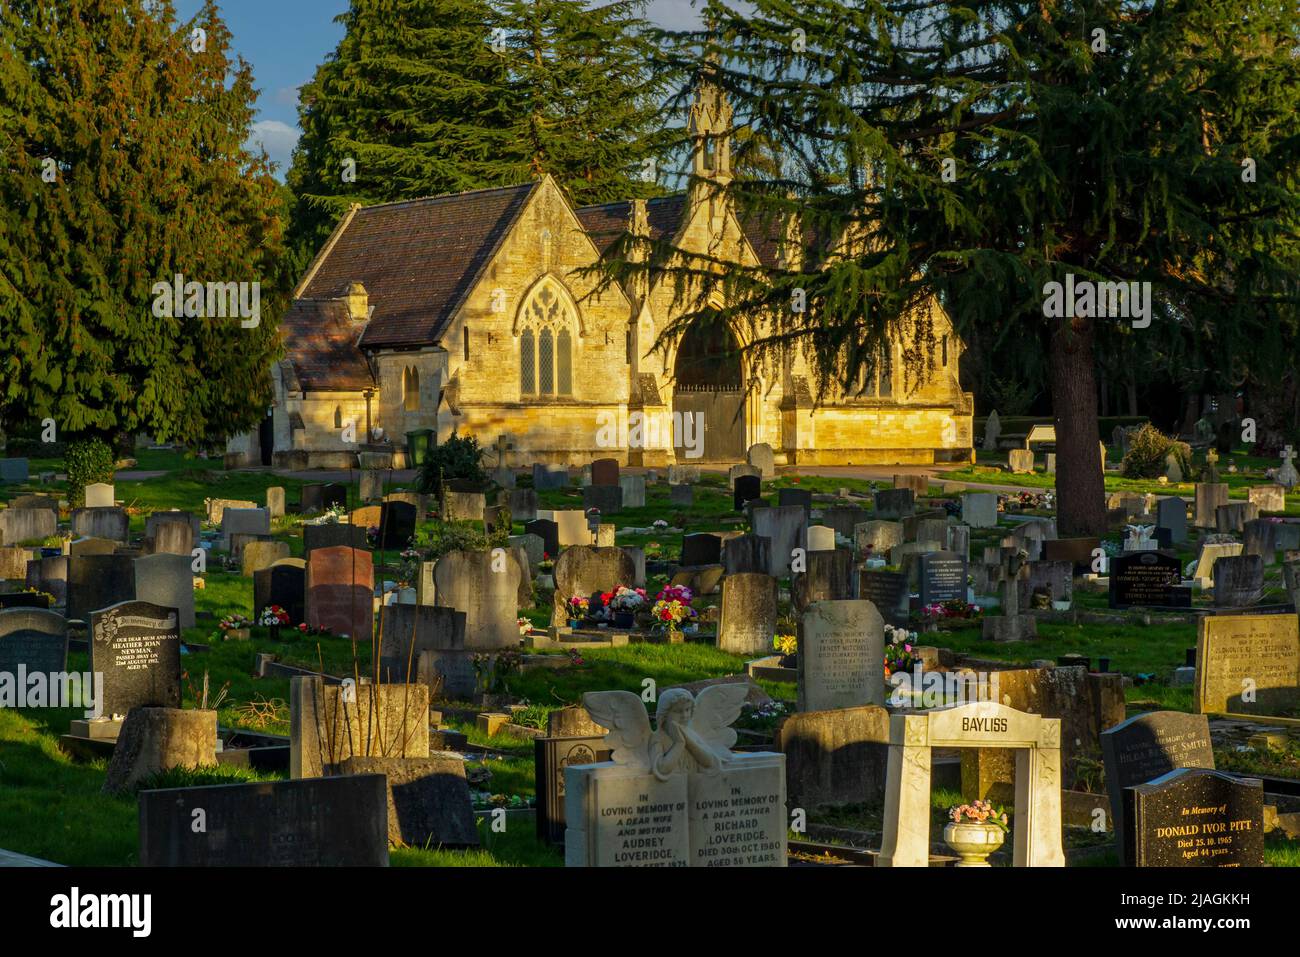 View over tombstones towards the Chapel building in Tewkesbury Cemetery Gloucestershire England UK which opened in 1857. Stock Photo